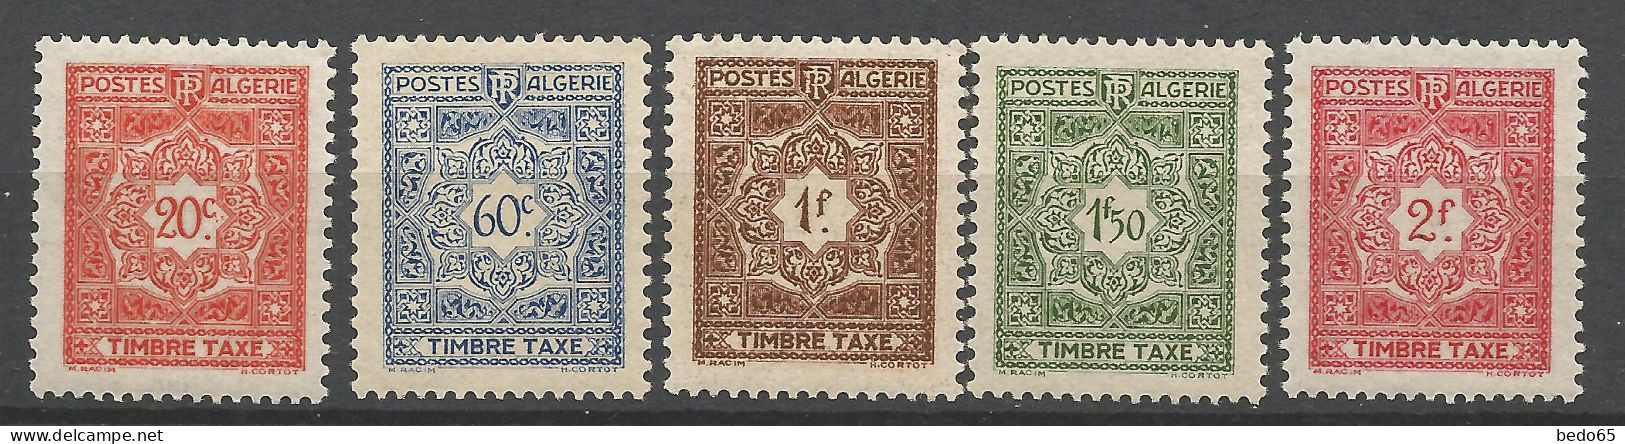 ALGERIE LOT  TAXE  NEUF**  SANS CHARNIERE  / Hingeless / MNH - Postage Due